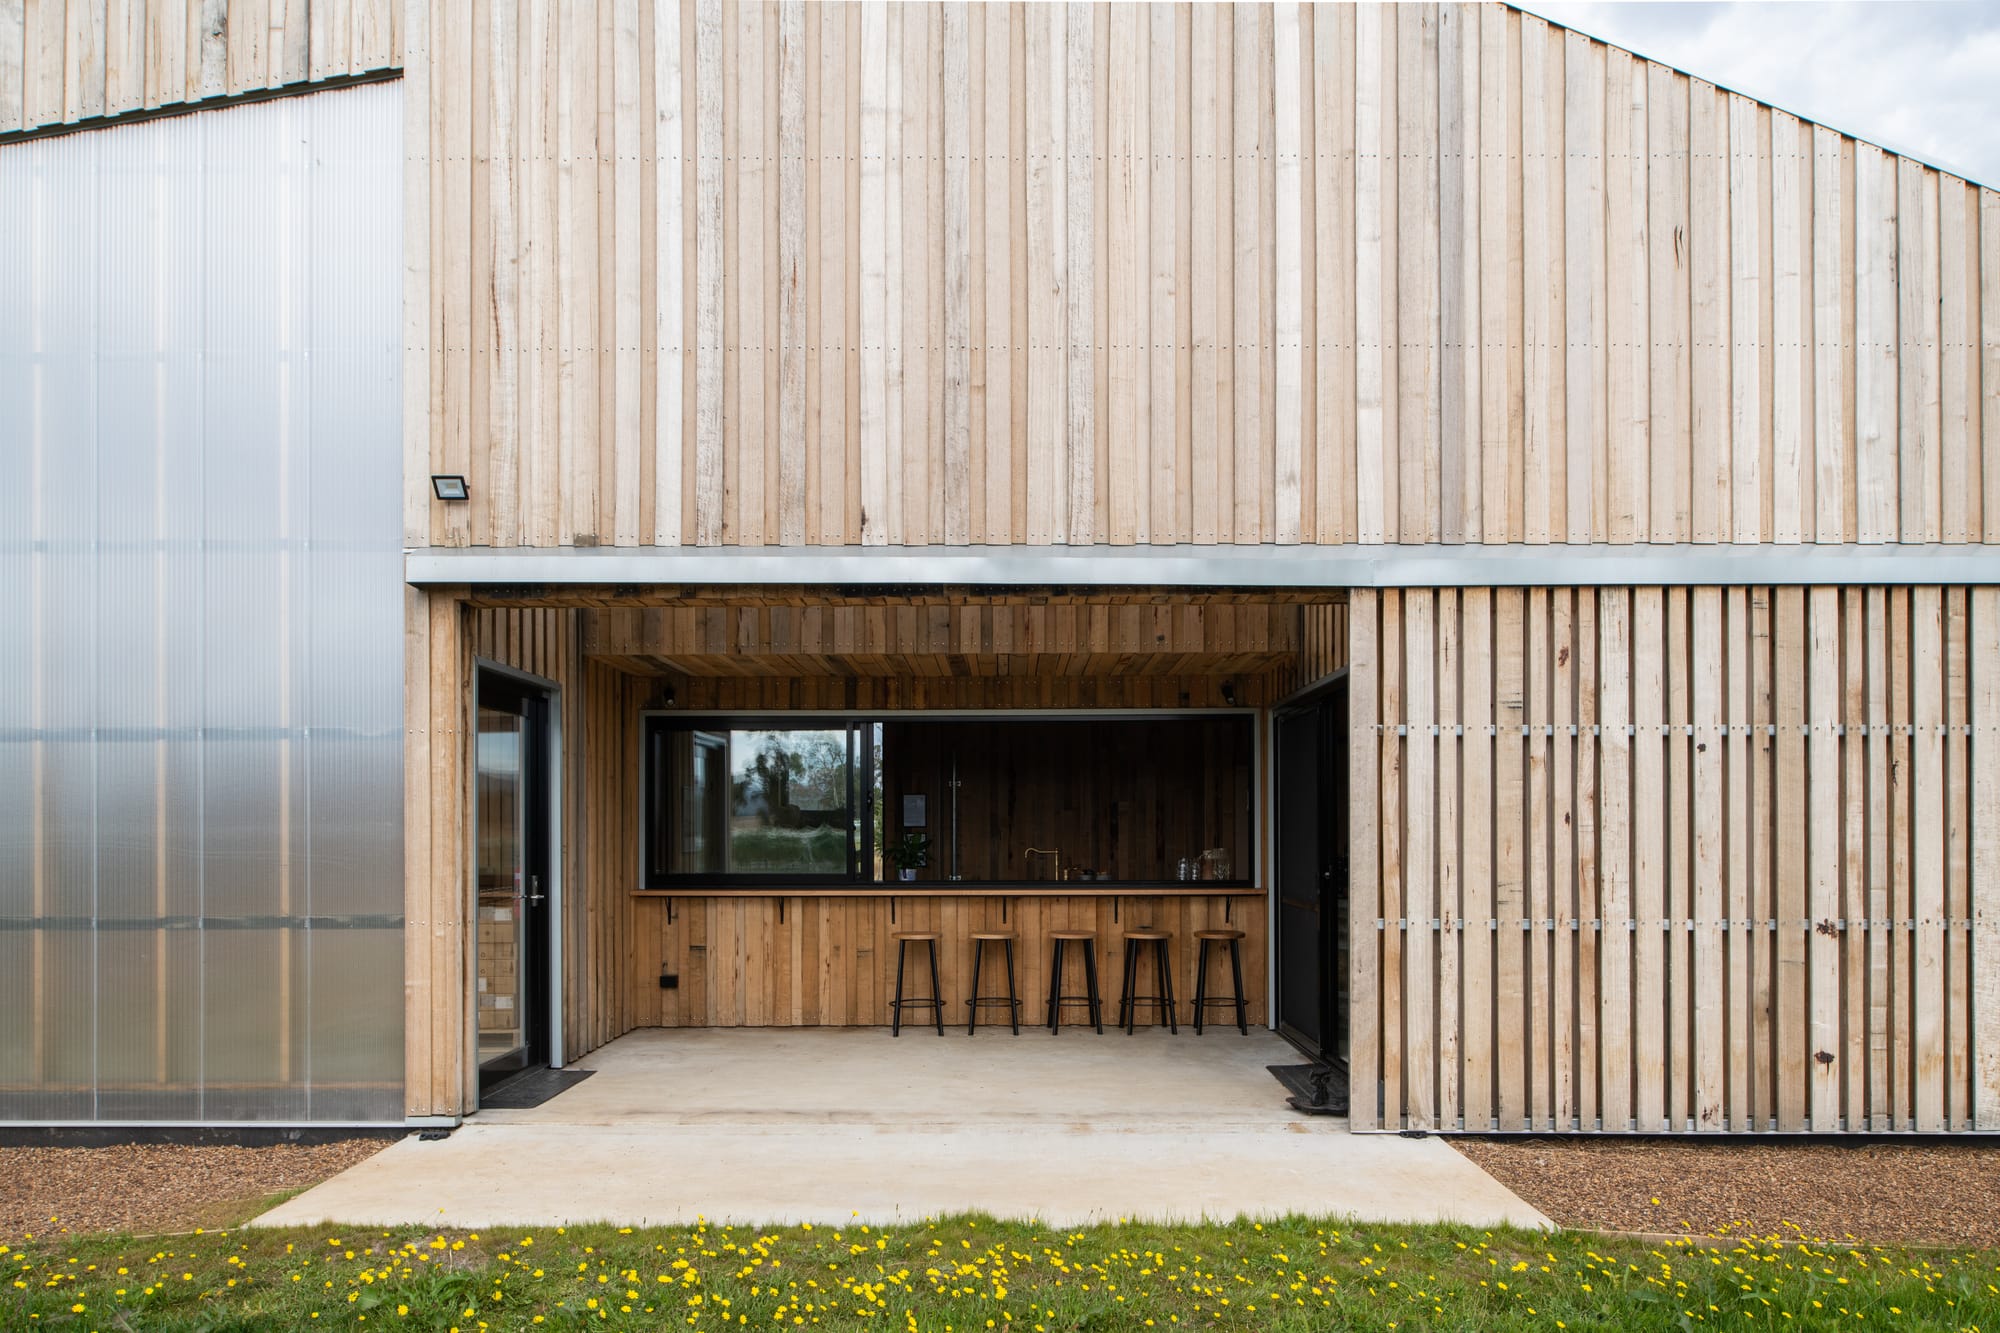 Tasmanian Timber Series: Westella Vineyard.Exterior view of Westella Vineyard's building featuring a weathered timber facade with vertical slats, a large glass entrance, and a corrugated metal roof, blending modern and rustic design elements.